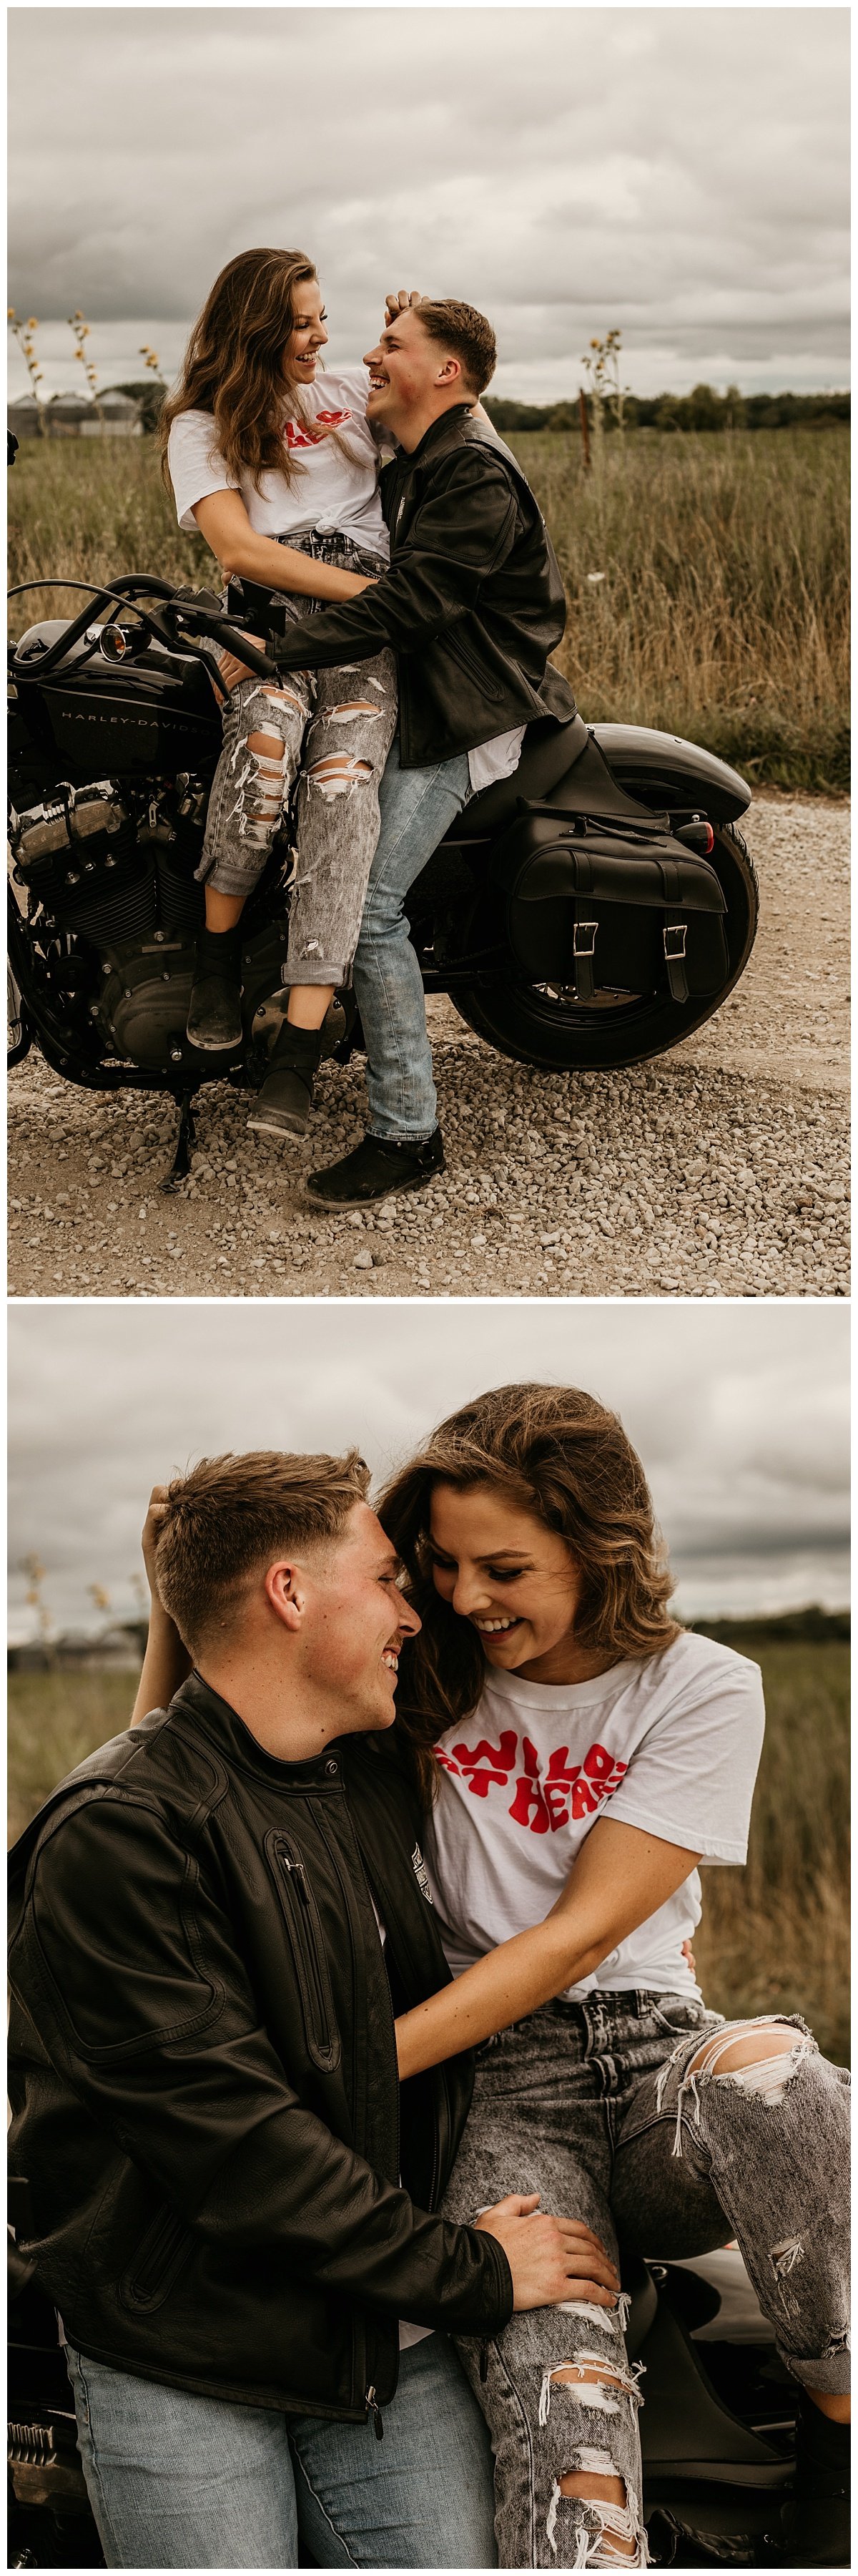 motorcycle+session+_+adventure+session+_+engagement+session+_+motorcycle+photos+_+lana+del+rey+_+ride+or+die+_+adventurous+couple+_+kansas+city+photographer+_+kansas+city+photography (12).jpeg